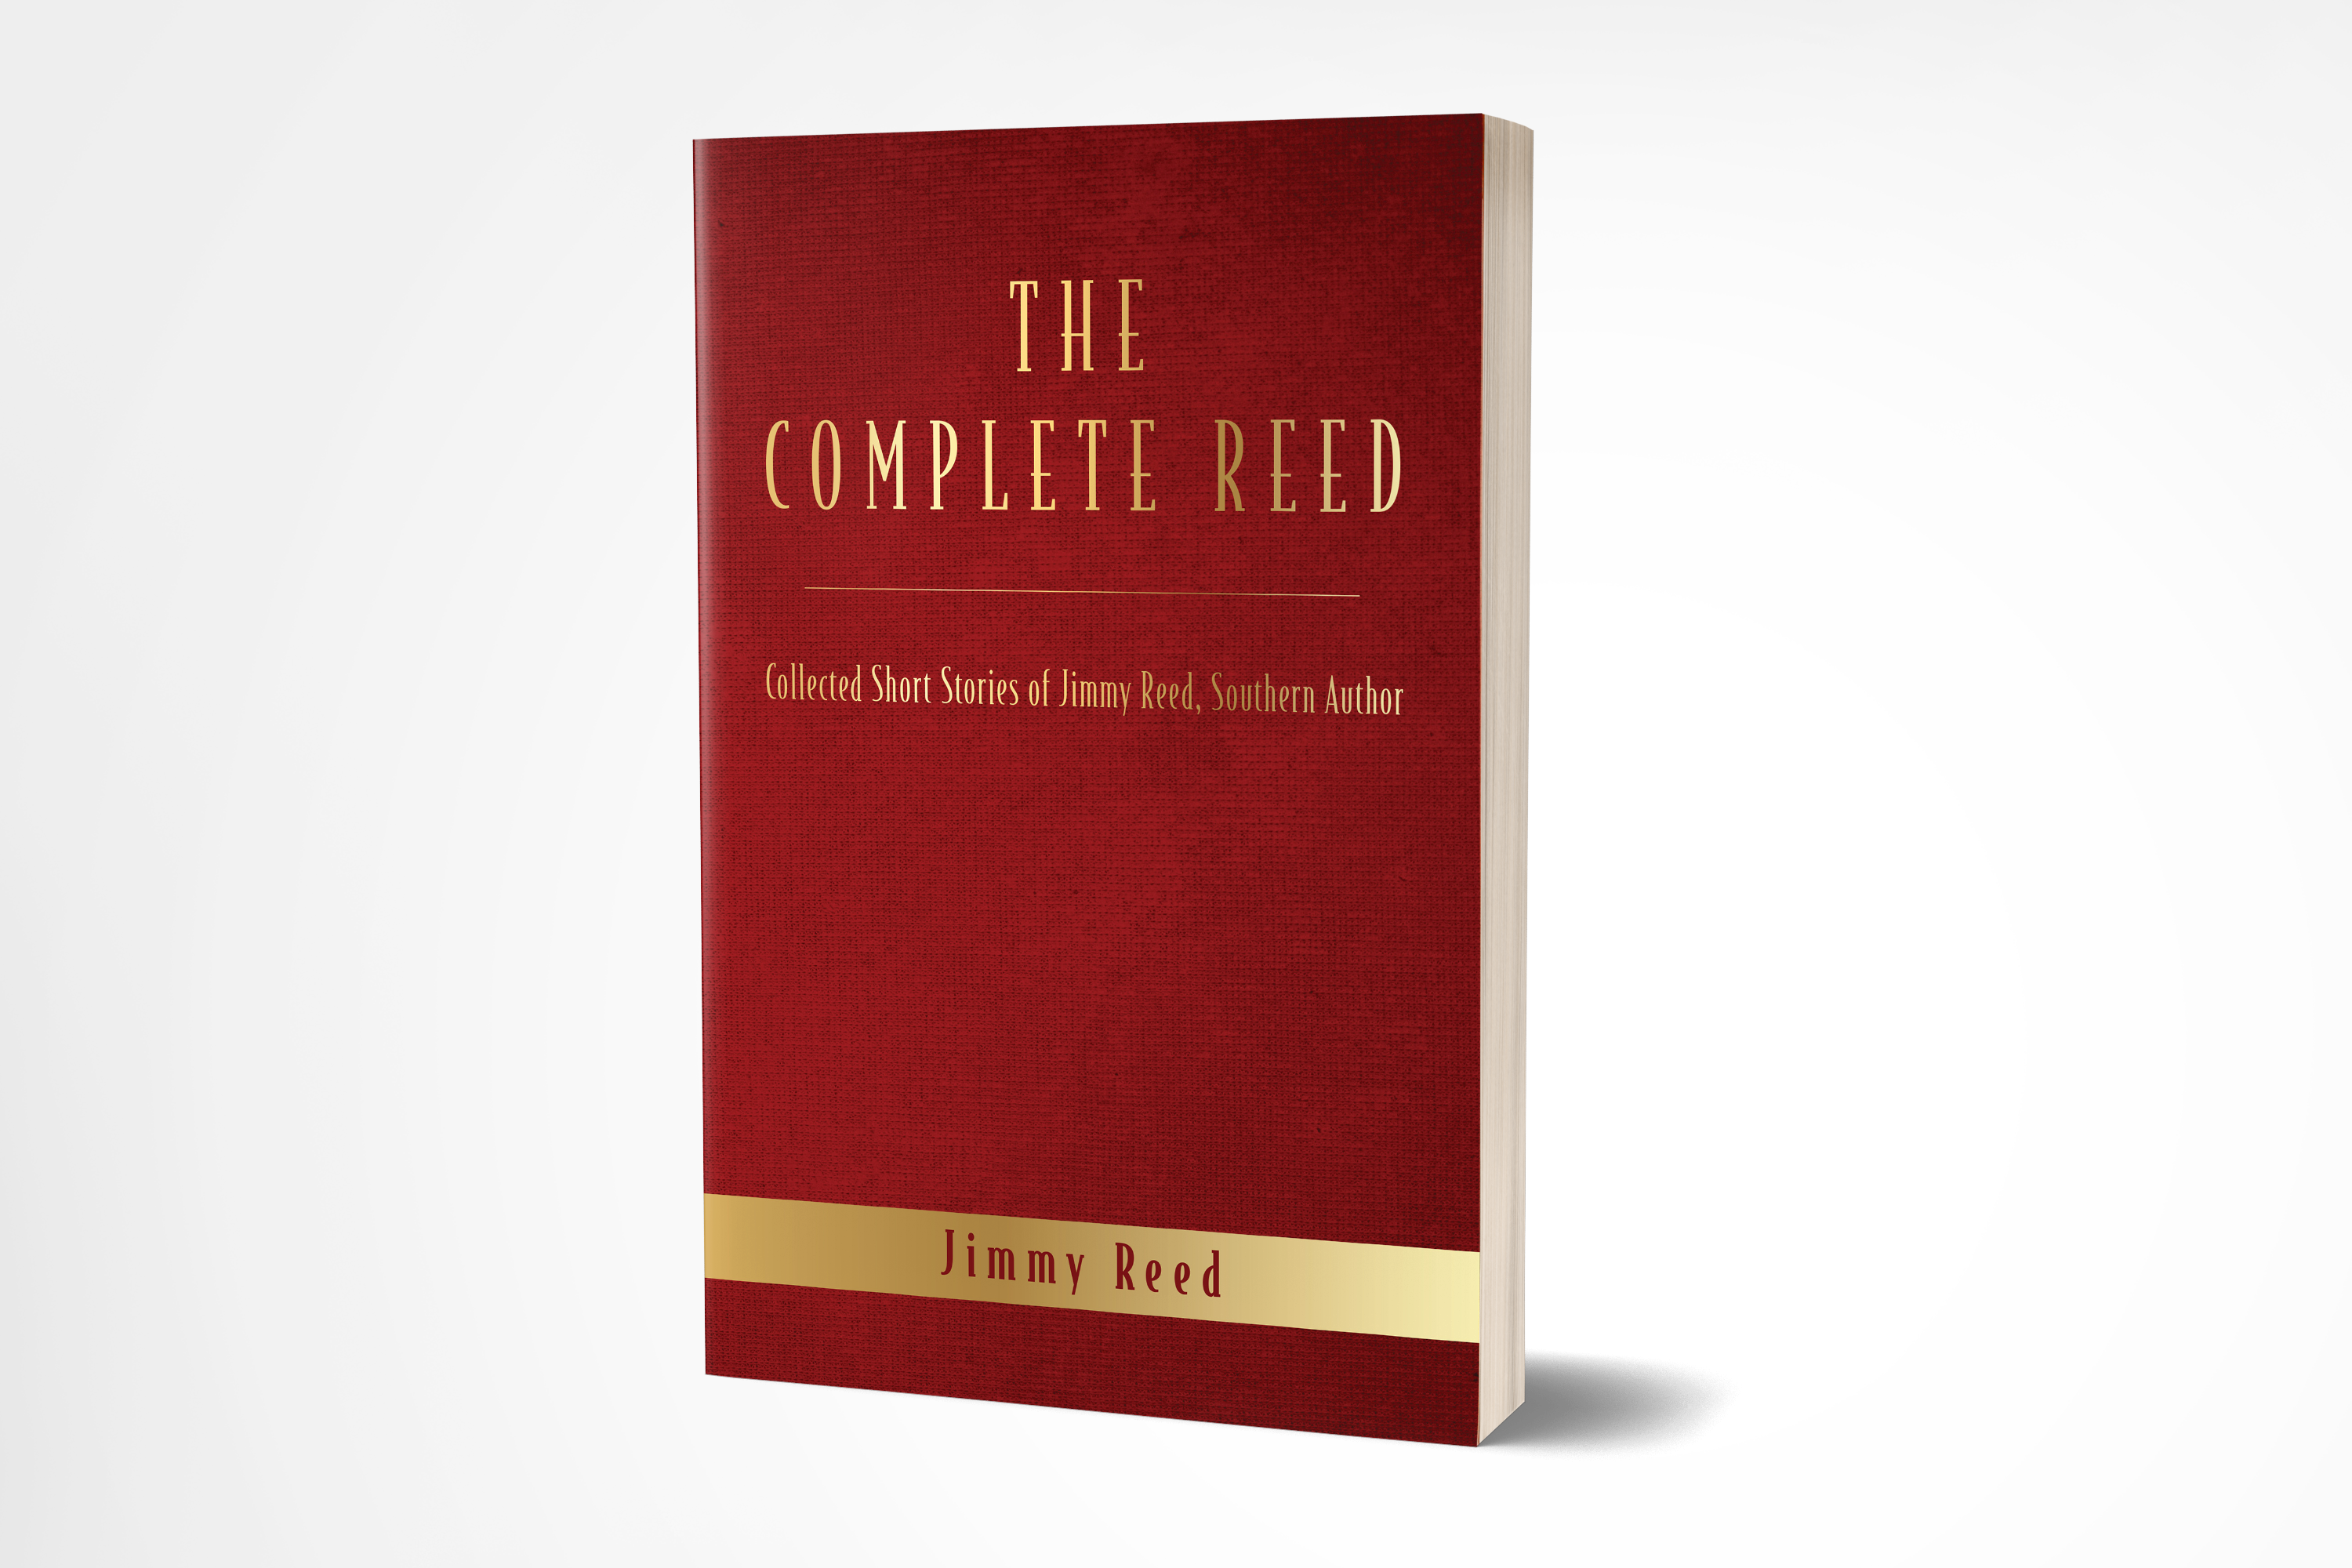 The Complete Reed: Collected Short Stories of Jimmy Reed Southern Author